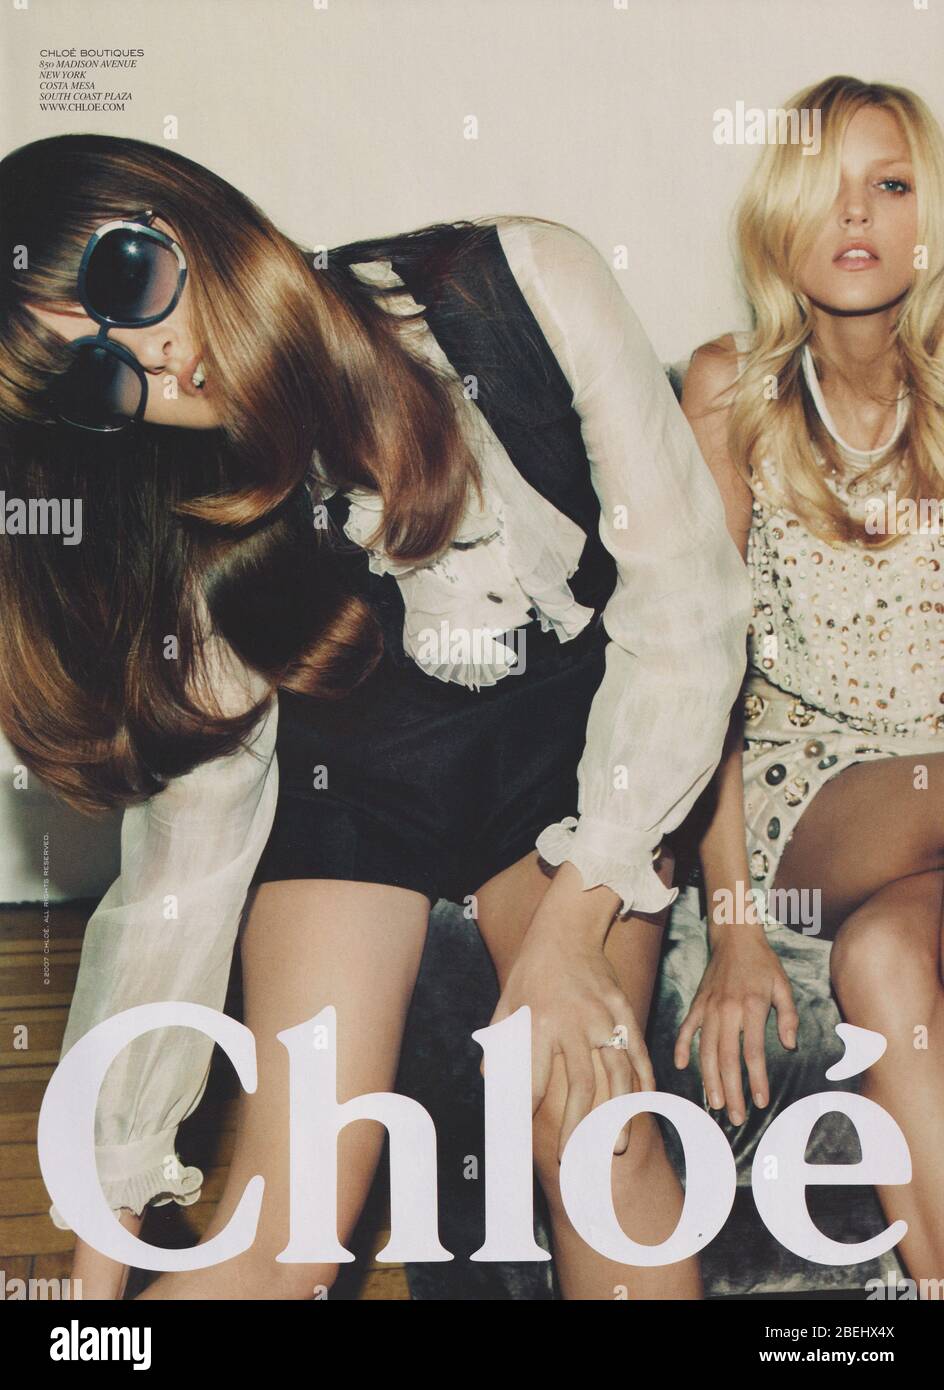 poster advertising Chloe fashion house in paper magazine from 2007 year,  advertisement, creative Chloe advert from 2000s Stock Photo - Alamy